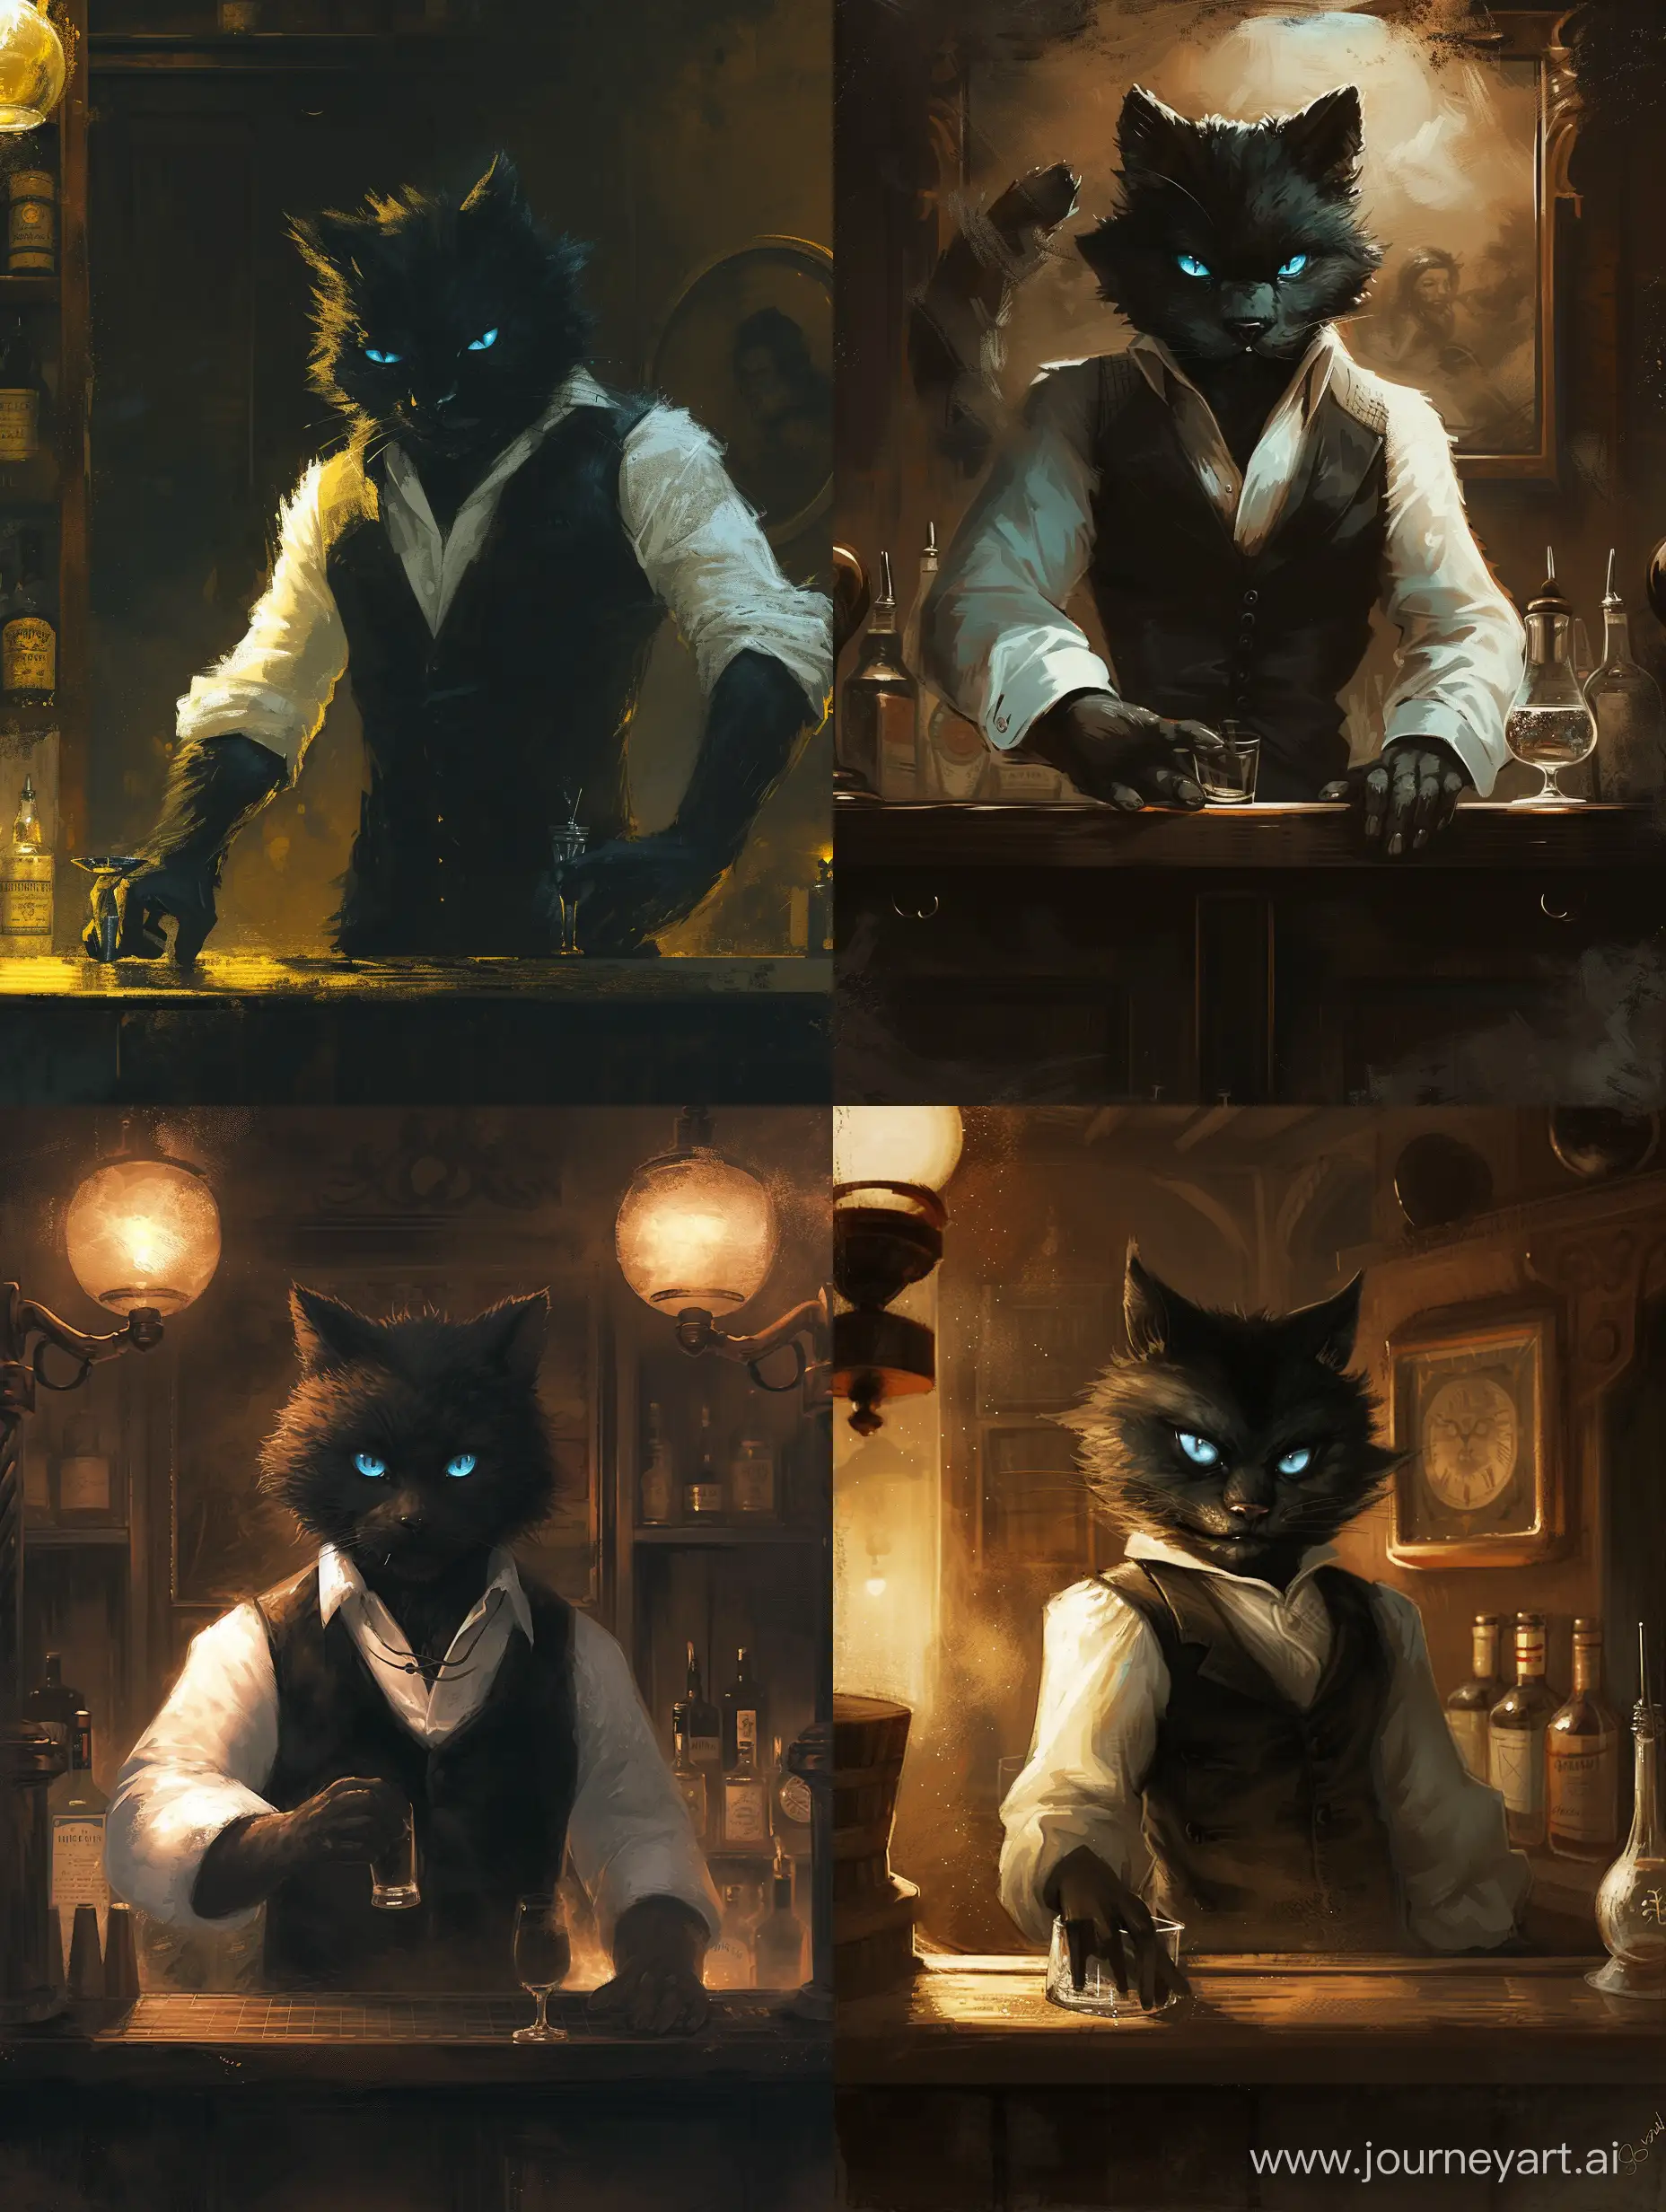 style: an old illustration; the hero: an anthropomorphic furry black cat with bright blue eyes, he is a bartender in a white shirt and black vest, serious, he rubs a glass; he stands behind the bar, the environment is dark and ranged light,